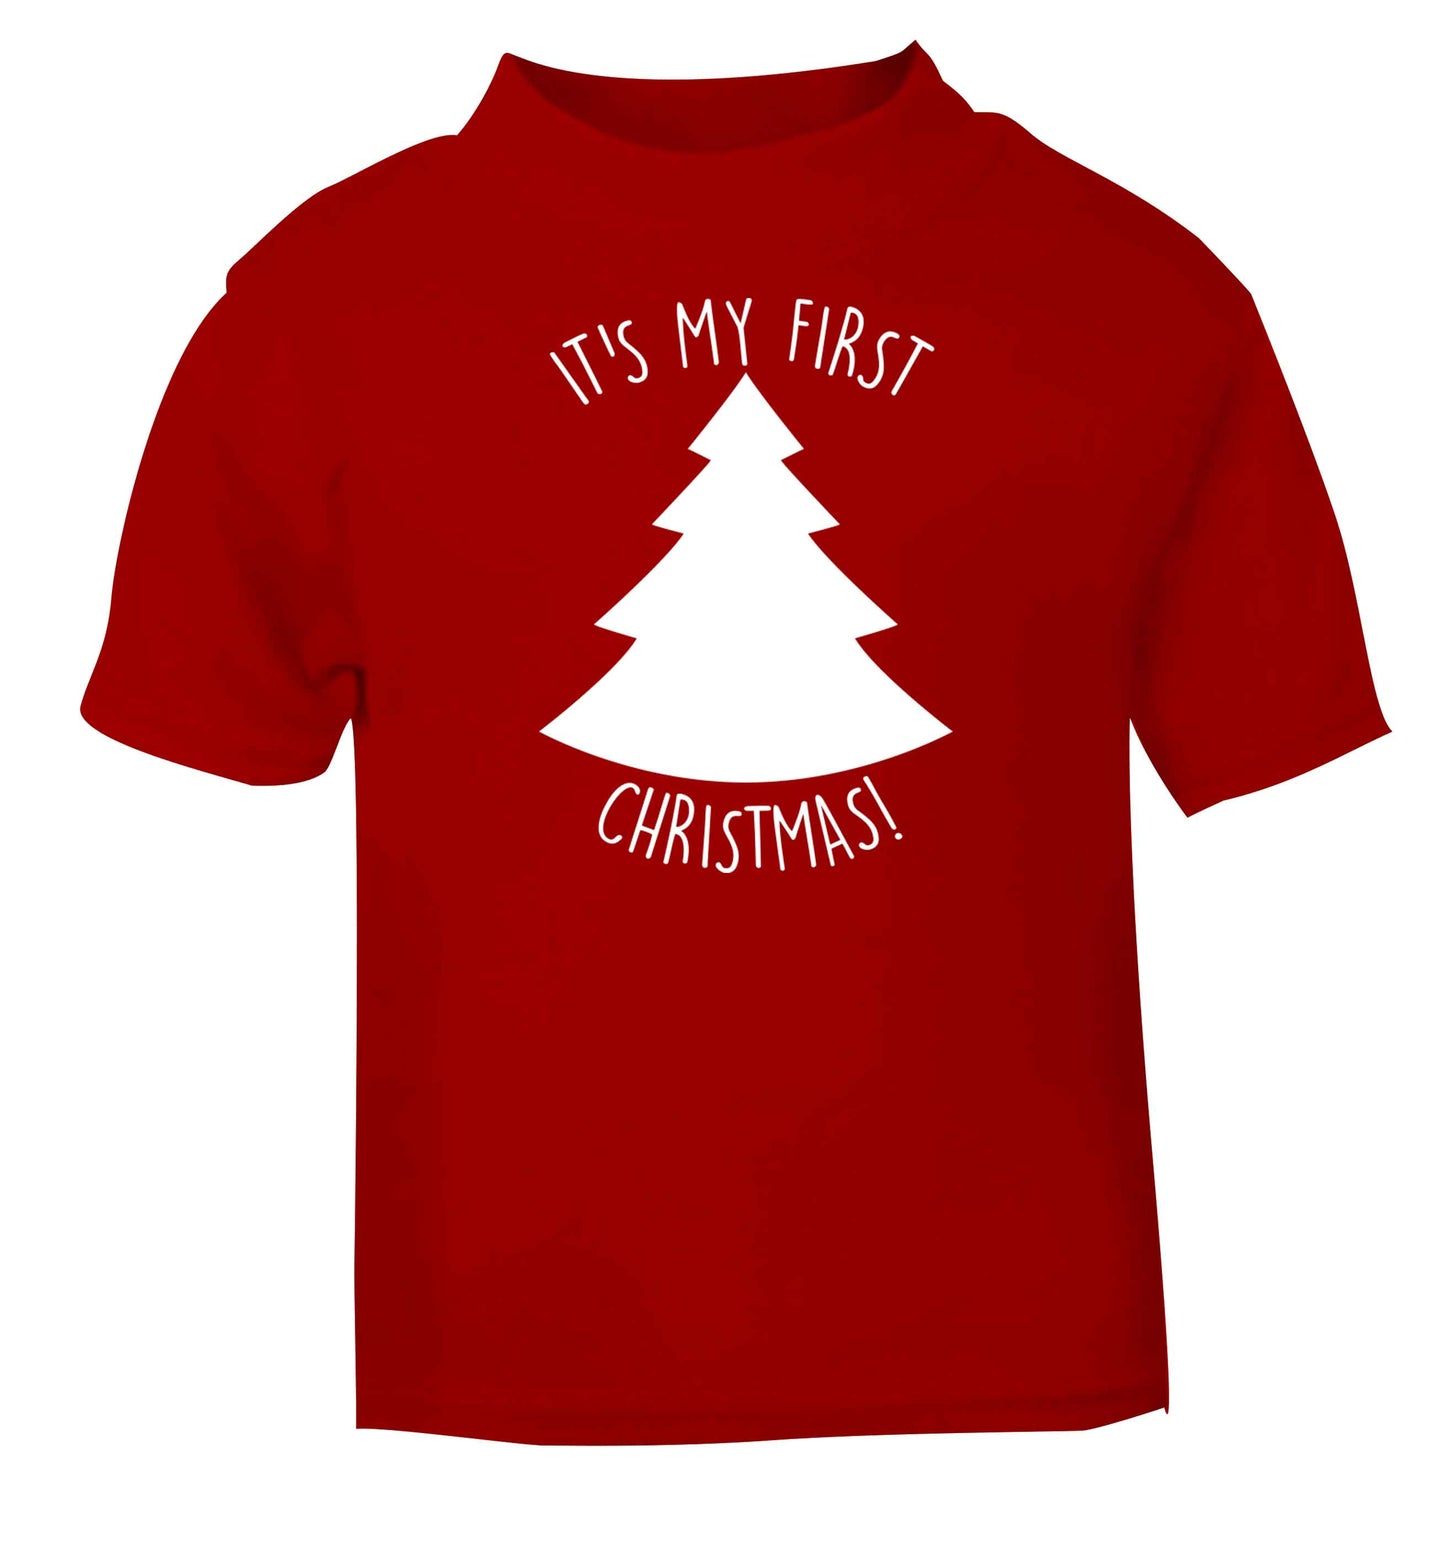 It's my first Christmas - tree red baby toddler Tshirt 2 Years